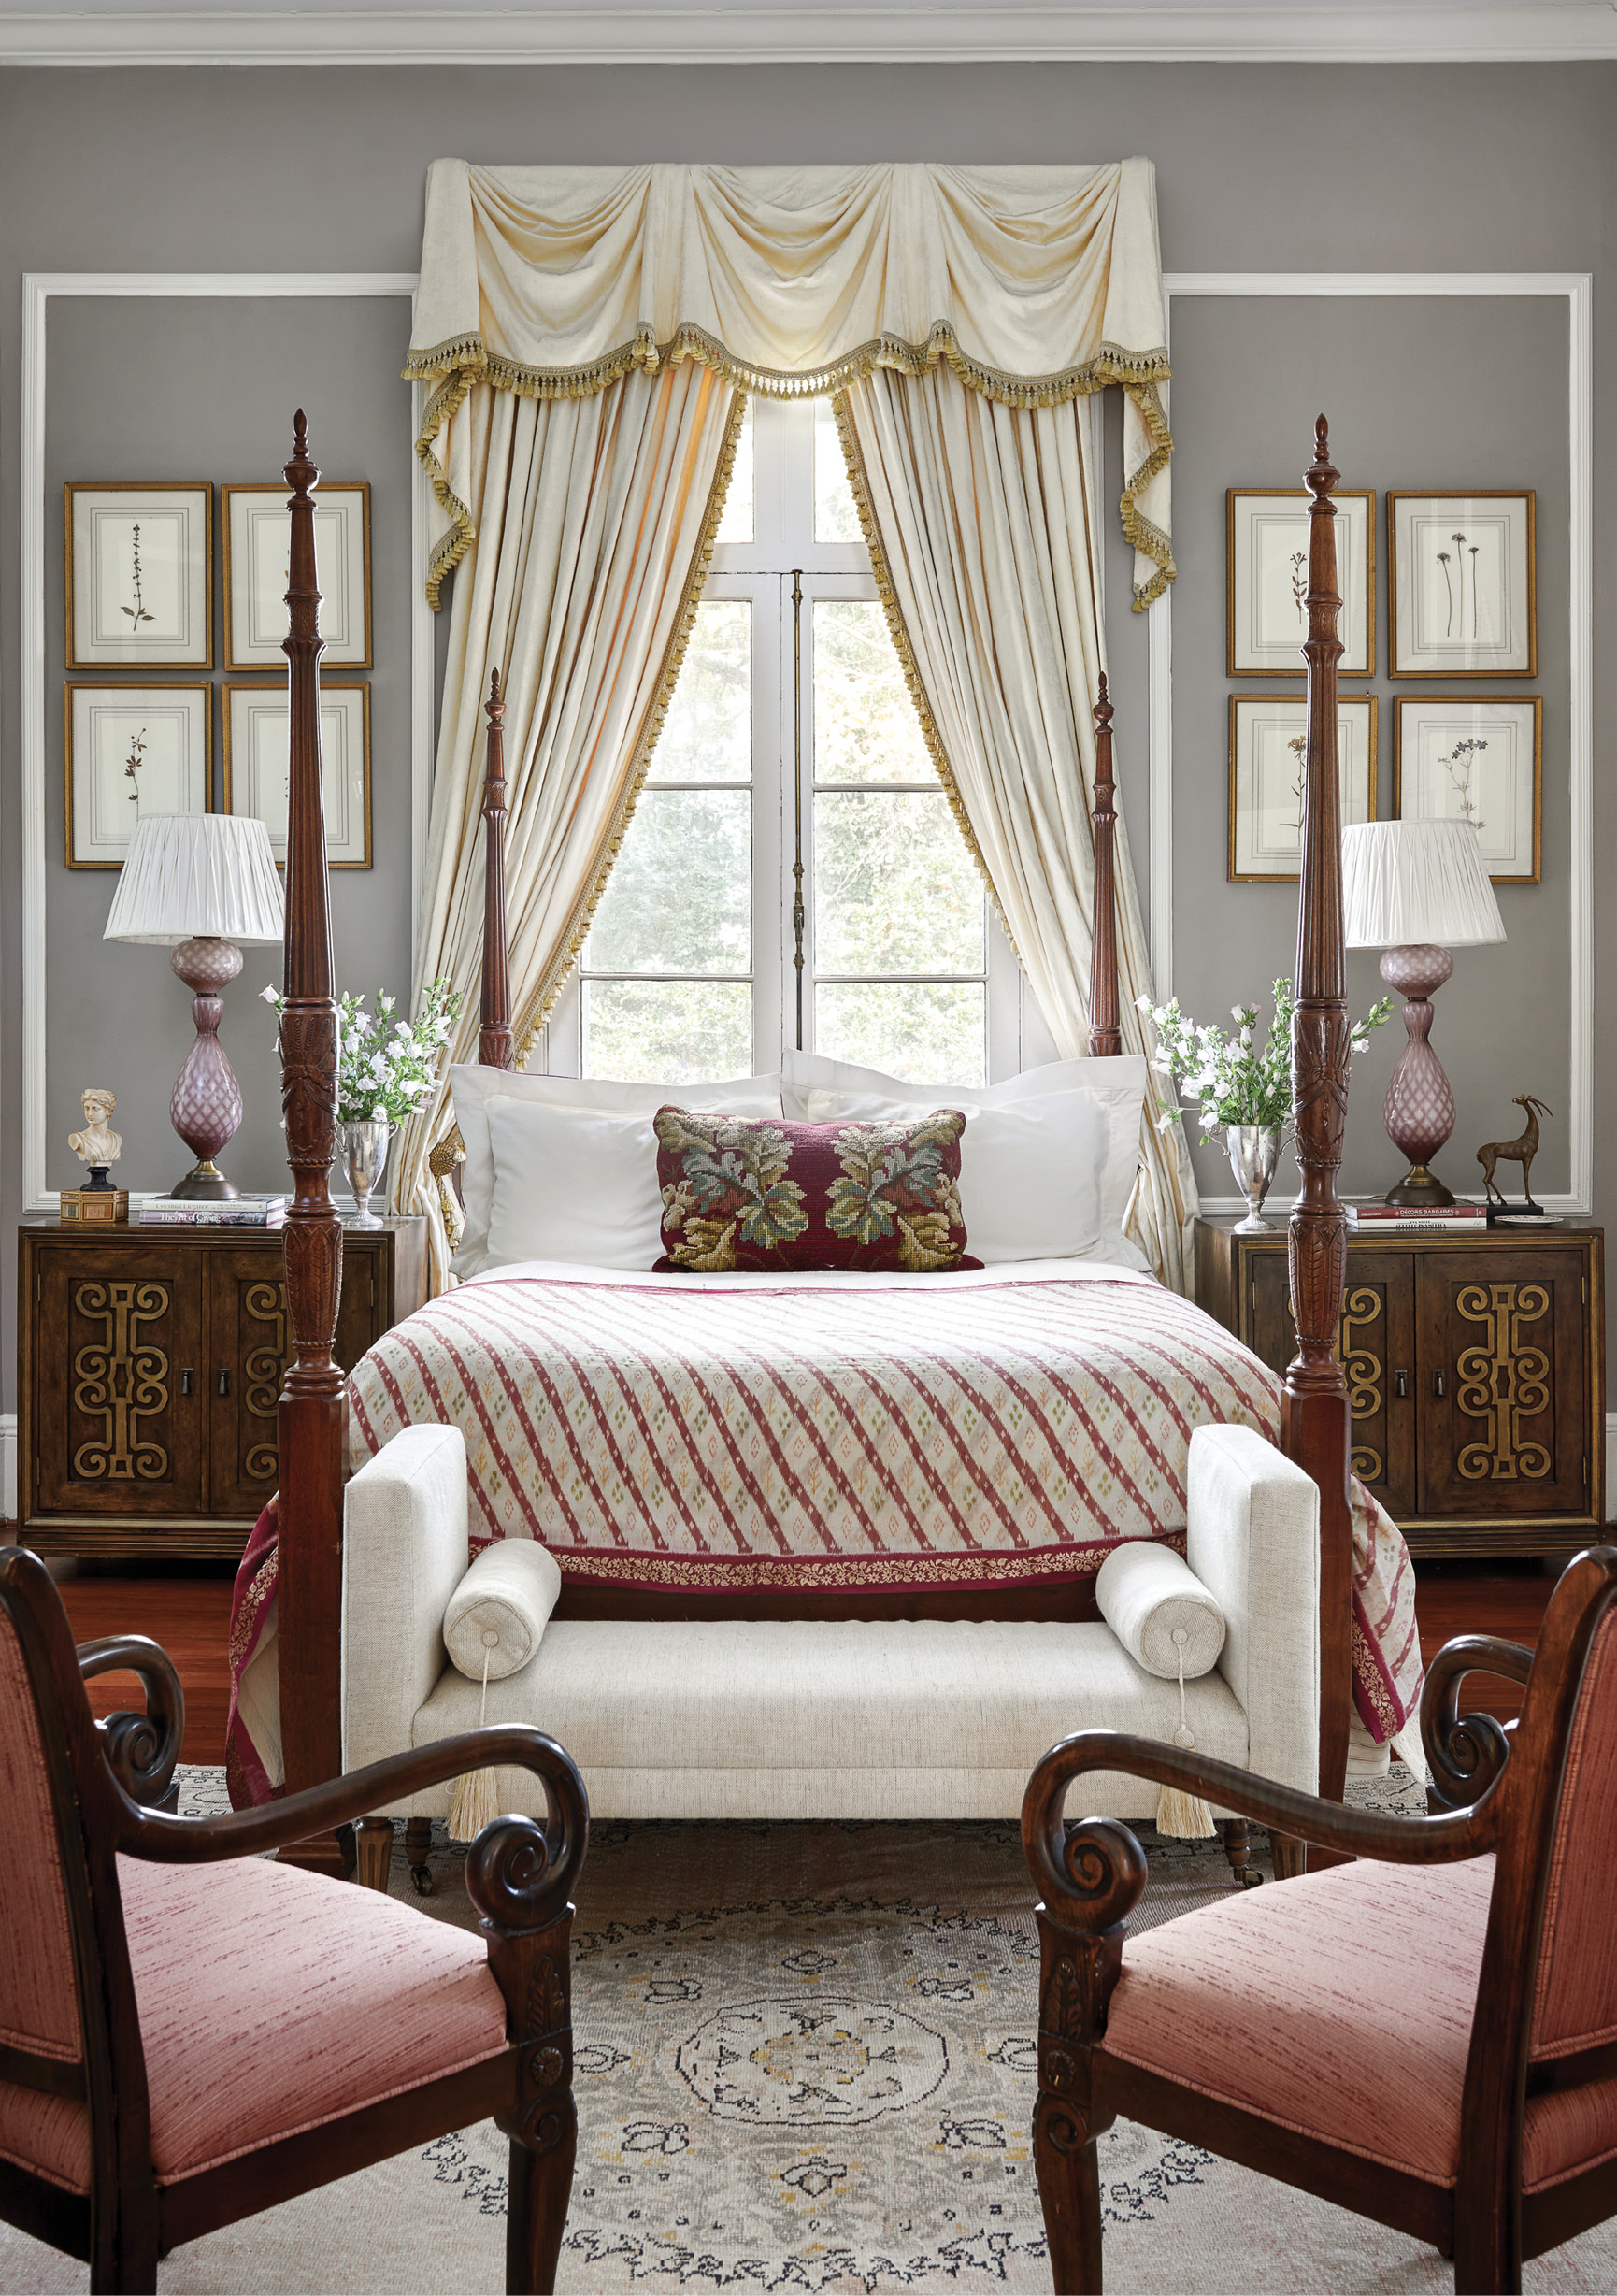 Color Story: In the primary bedroom, Ralph reused much of the Fergusons’ existing furniture, refreshing the space with a new palette of creams, purples, and burgundies. A vintage textile rug and custom shams add interest to the four-poster bed, and a custom bench is covered with a durable Itex fabric to accommodate the couple’s two dogs. Vintage Murano glass table lamps highlight their collection of botanical art, accentuated by the Benjamin Moore “Elephant Gray” wall paint.